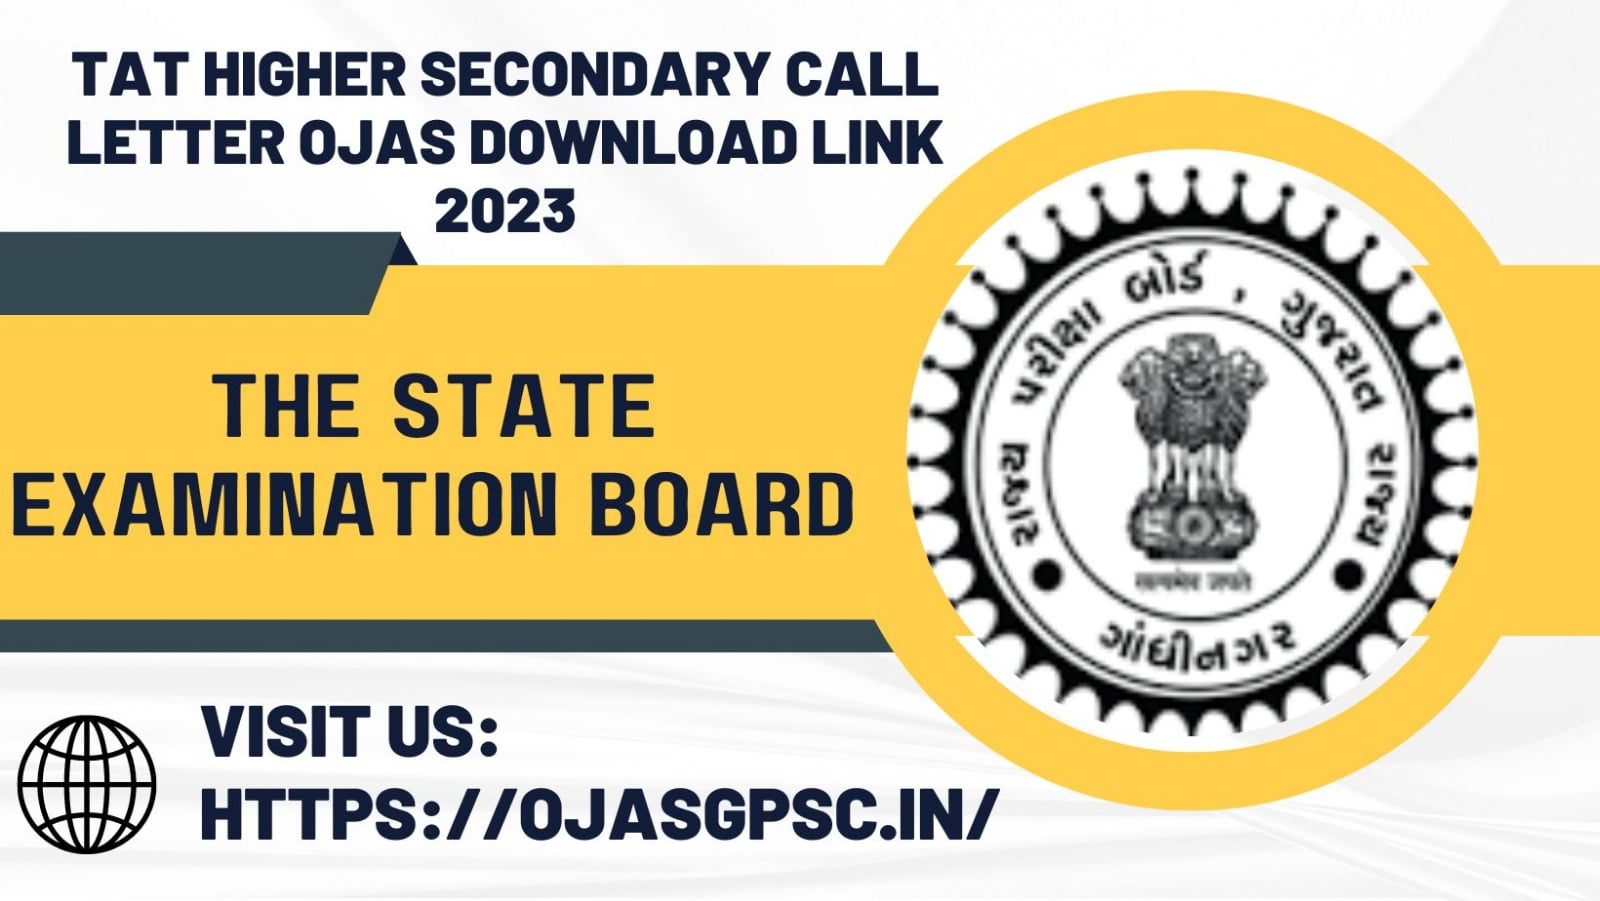 TAT Higher Secondary Call Letter OJAS Download Link 2023